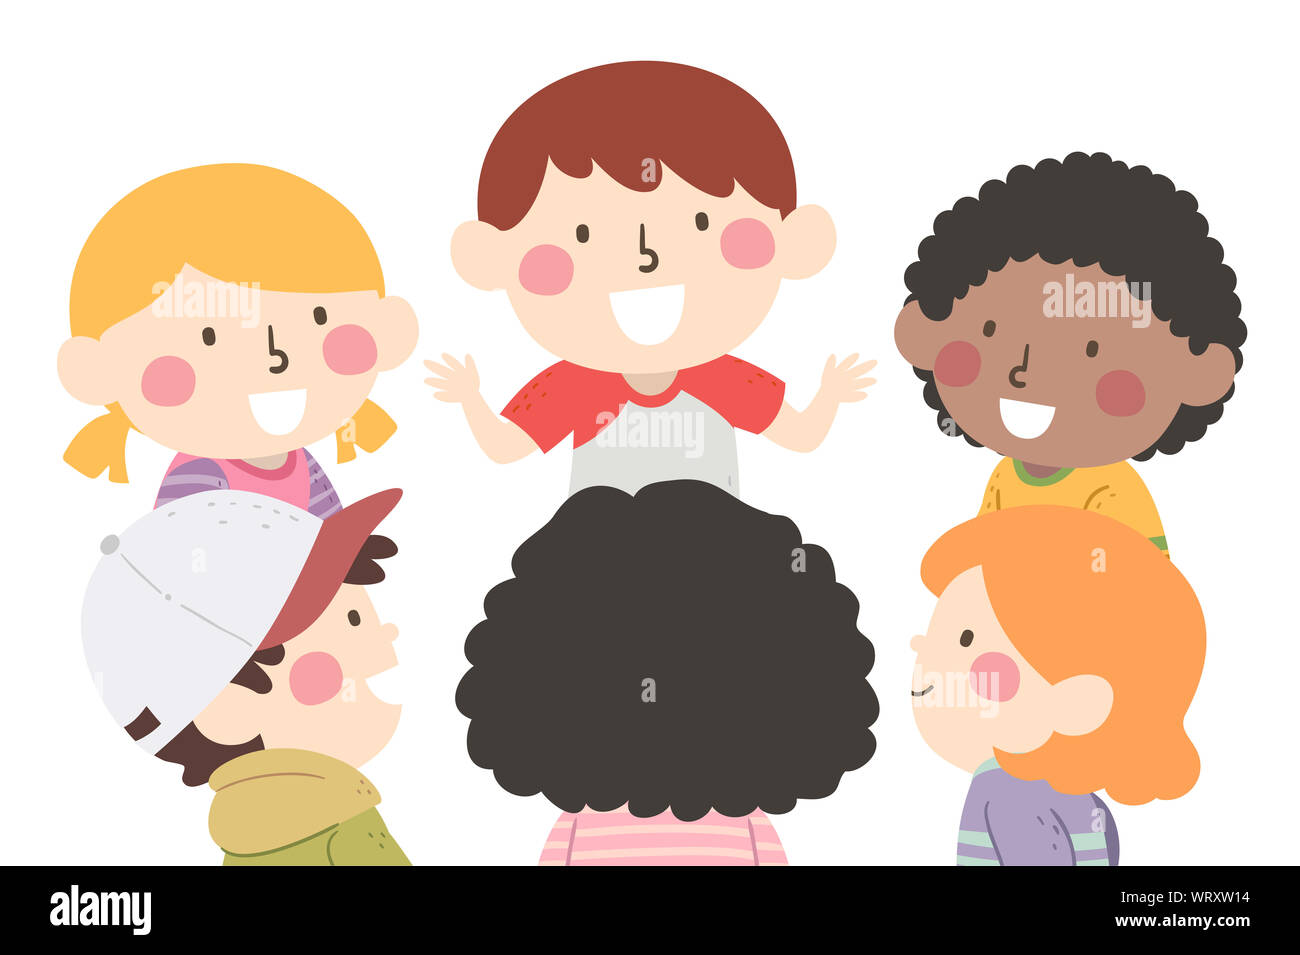 Illustration Of Kids Talking In Circle As A Group Stock Photo Alamy